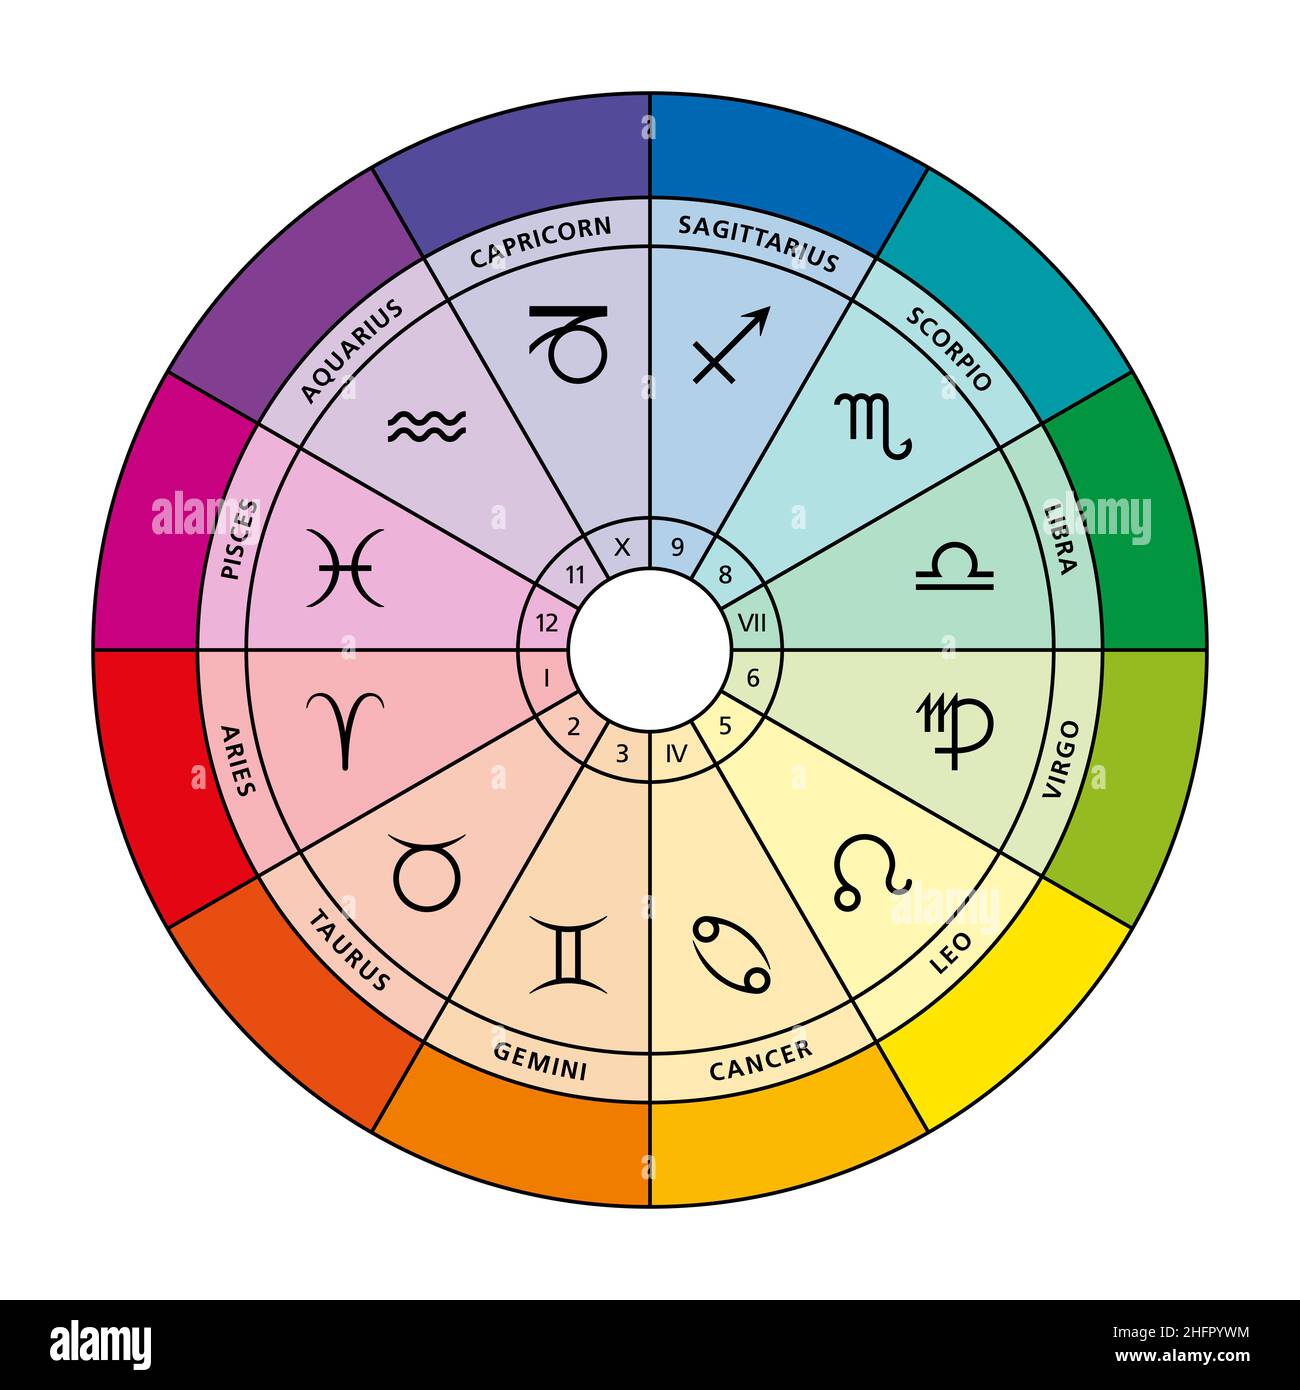 Star signs and their colors in the zodiac. Astrological chart showing twelve star signs, their houses and their belonging colors. Wheel of the zodiac. Stock Photo